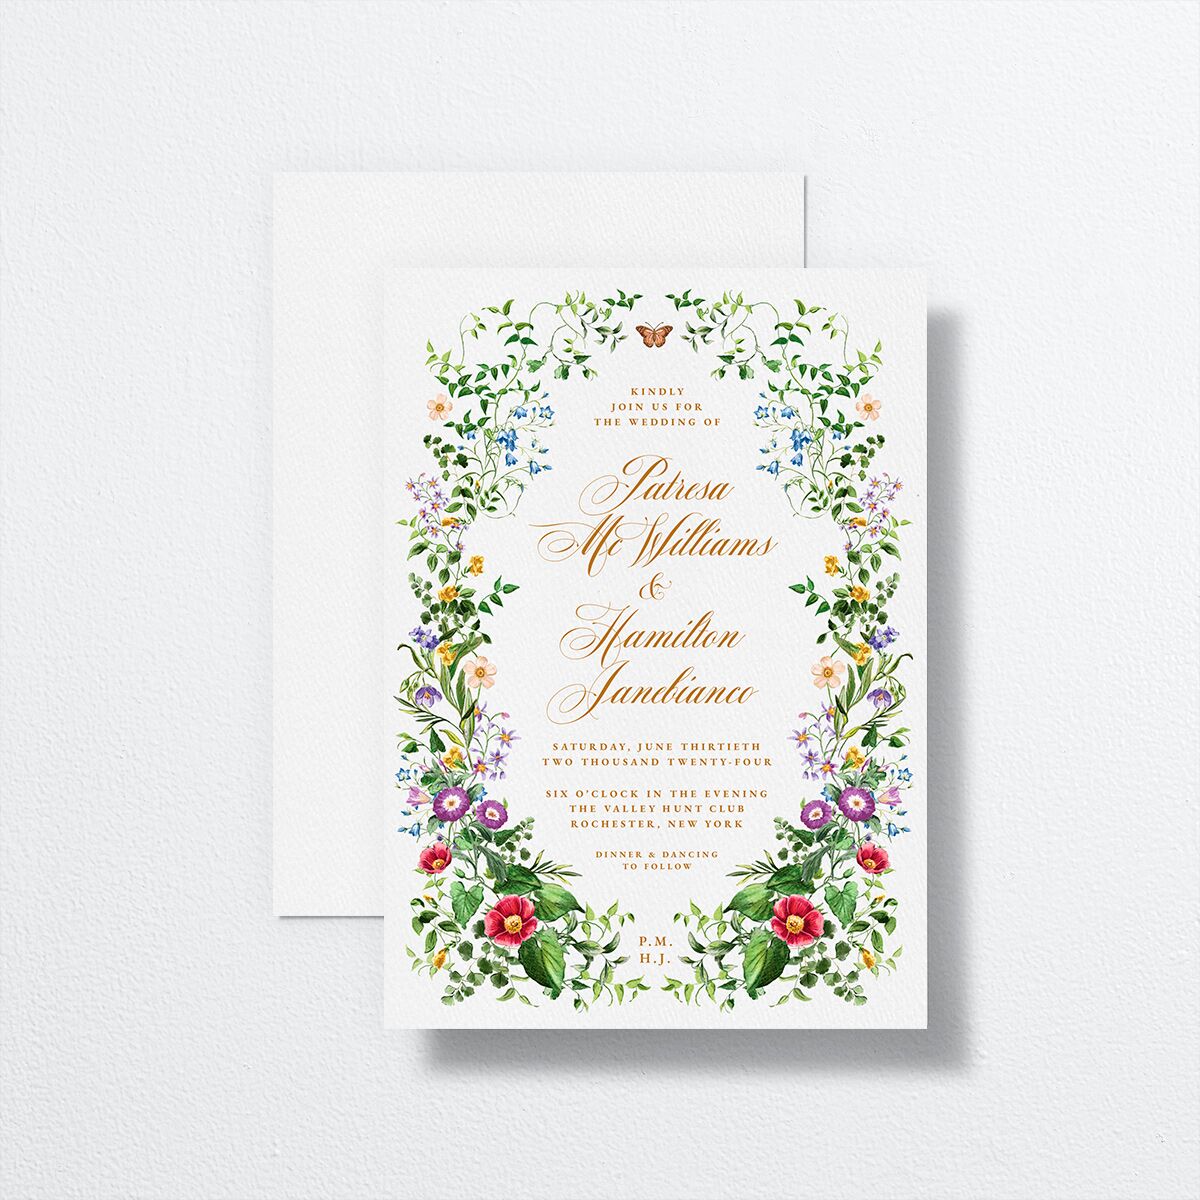 Opulent Garden Wedding Invitations front-and-back